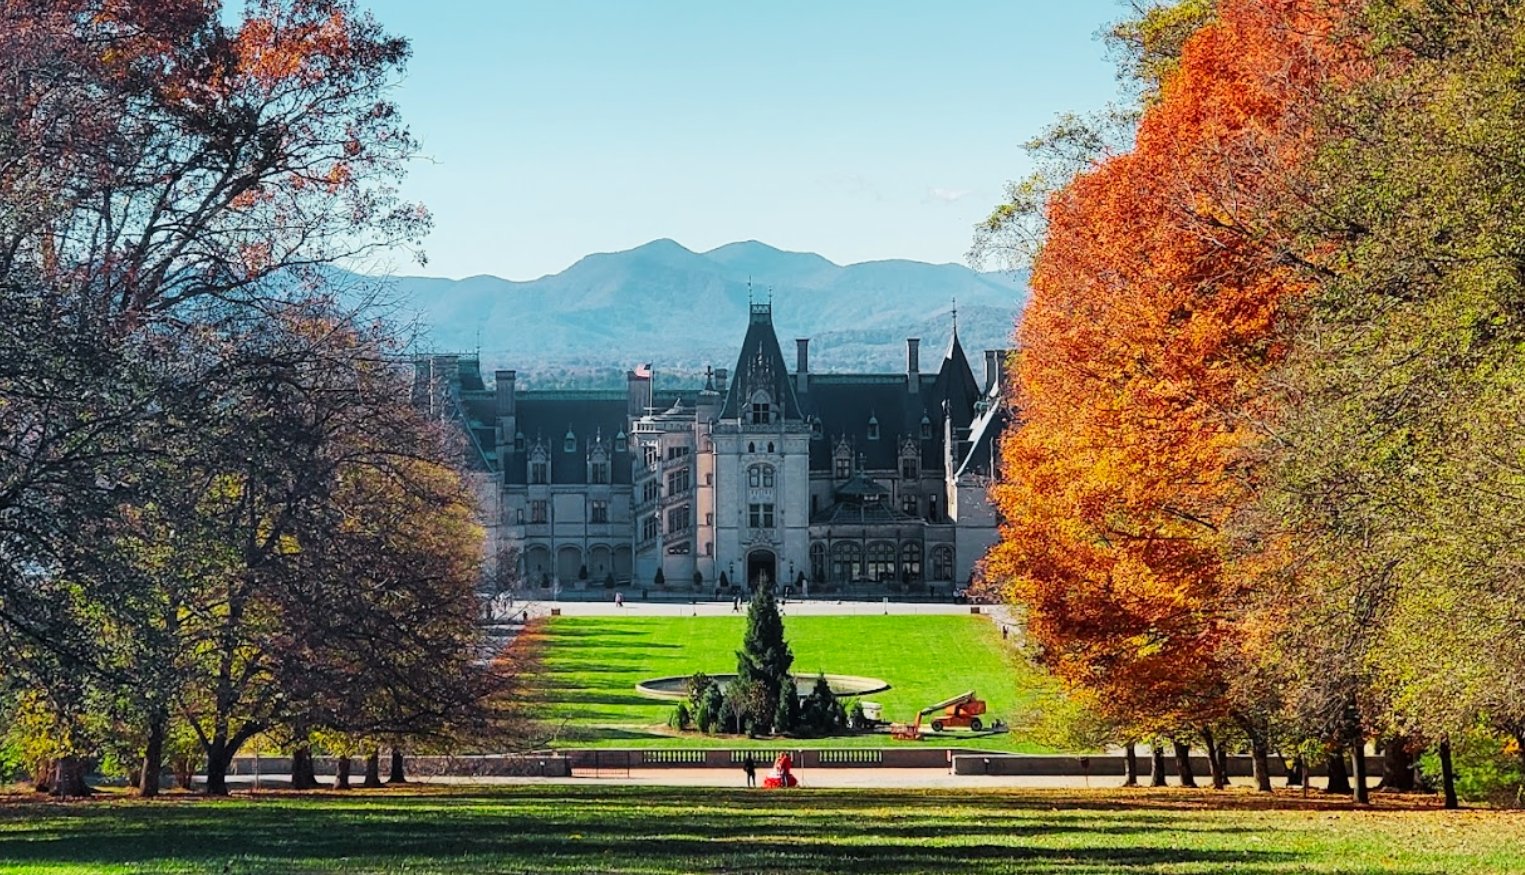 Biltmore Estate nestled in the picturesque Blue Ridge Mountains of Asheville | Asheville, NC Travel Guide